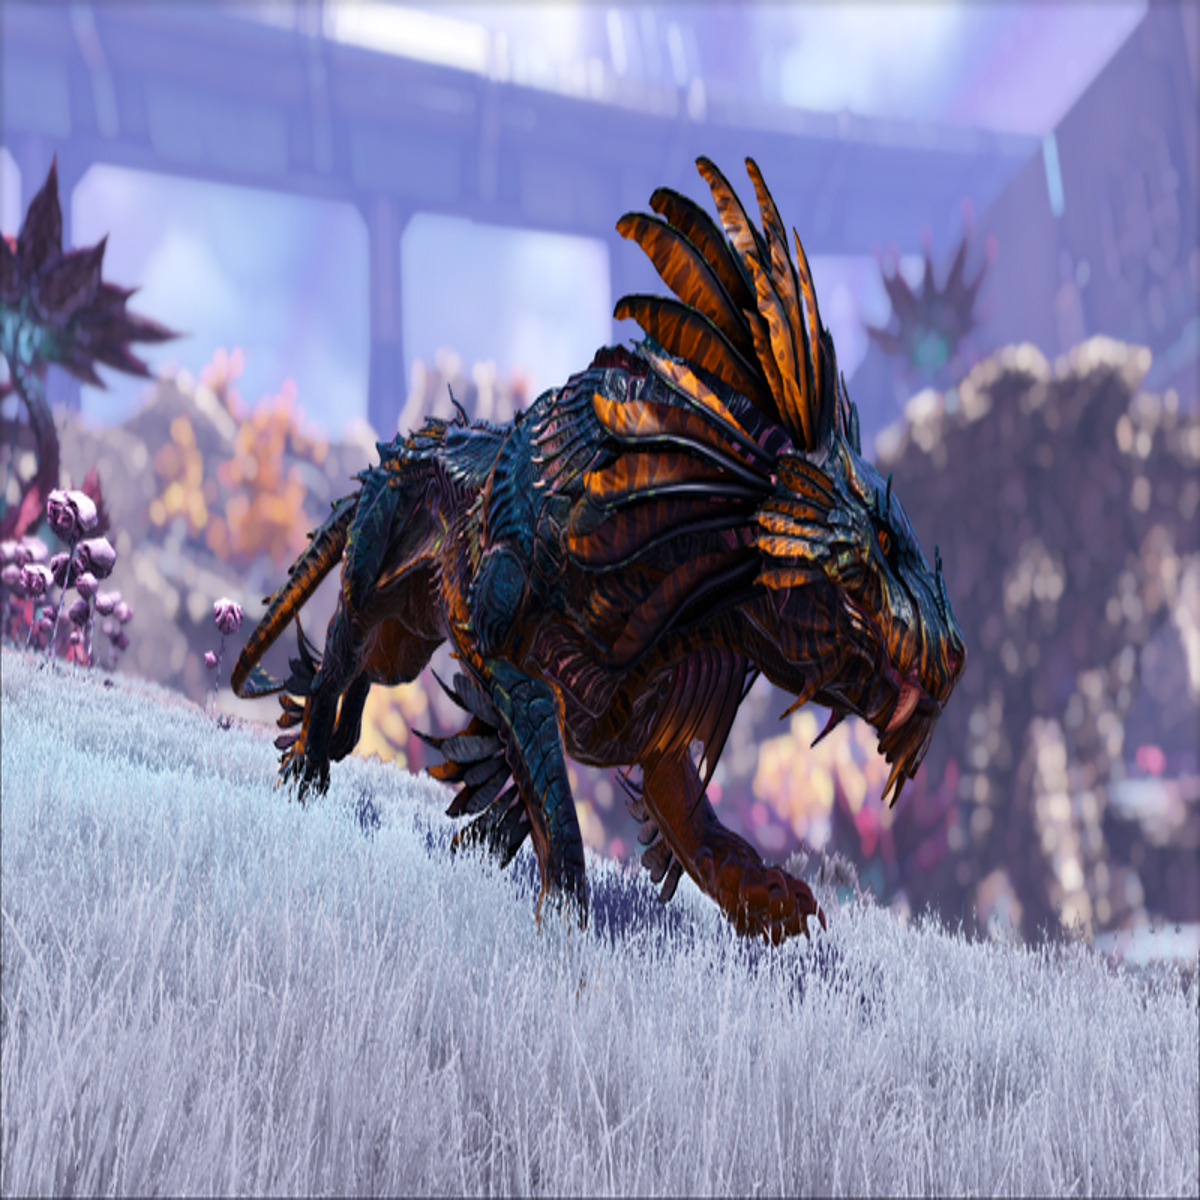 Every New Creature in Genesis Part 2 - ARK Survival Evolved DLC